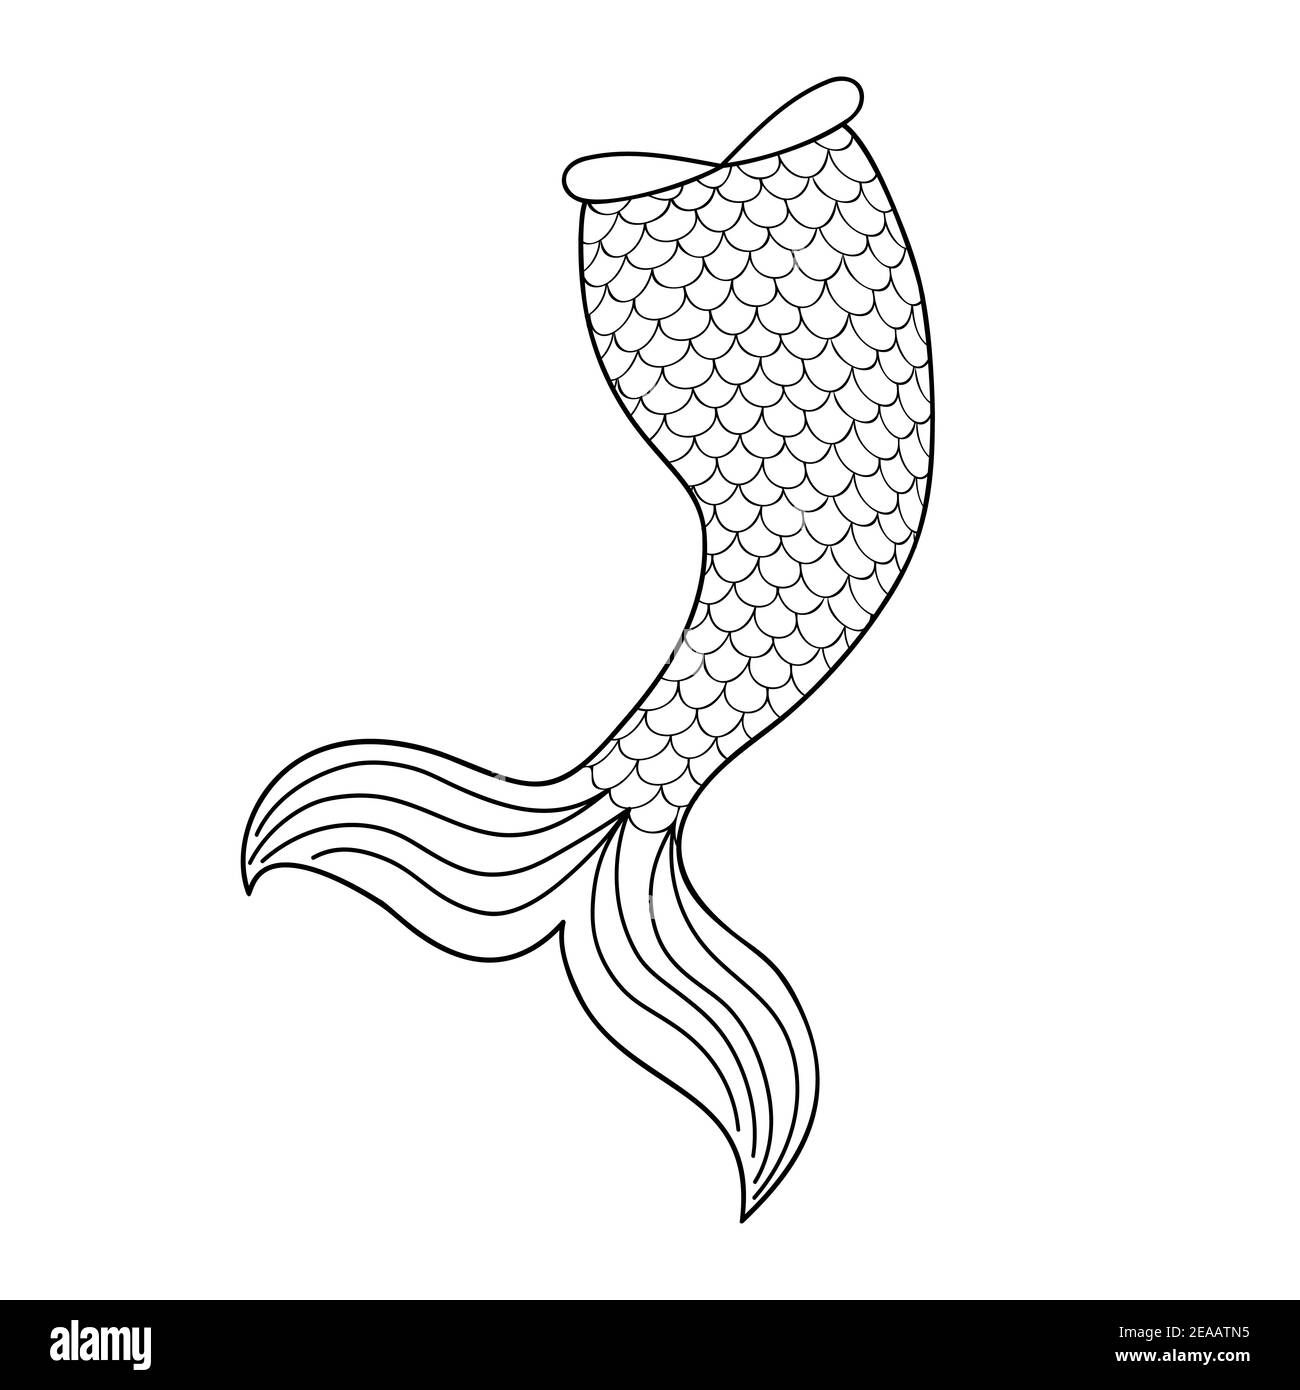 Hand drawn mermaid tail isolated on white background. Element of mermaid costume, decoration for greeting card or tshirt design. Black and white vector illustration in doodle style. Stock Vector